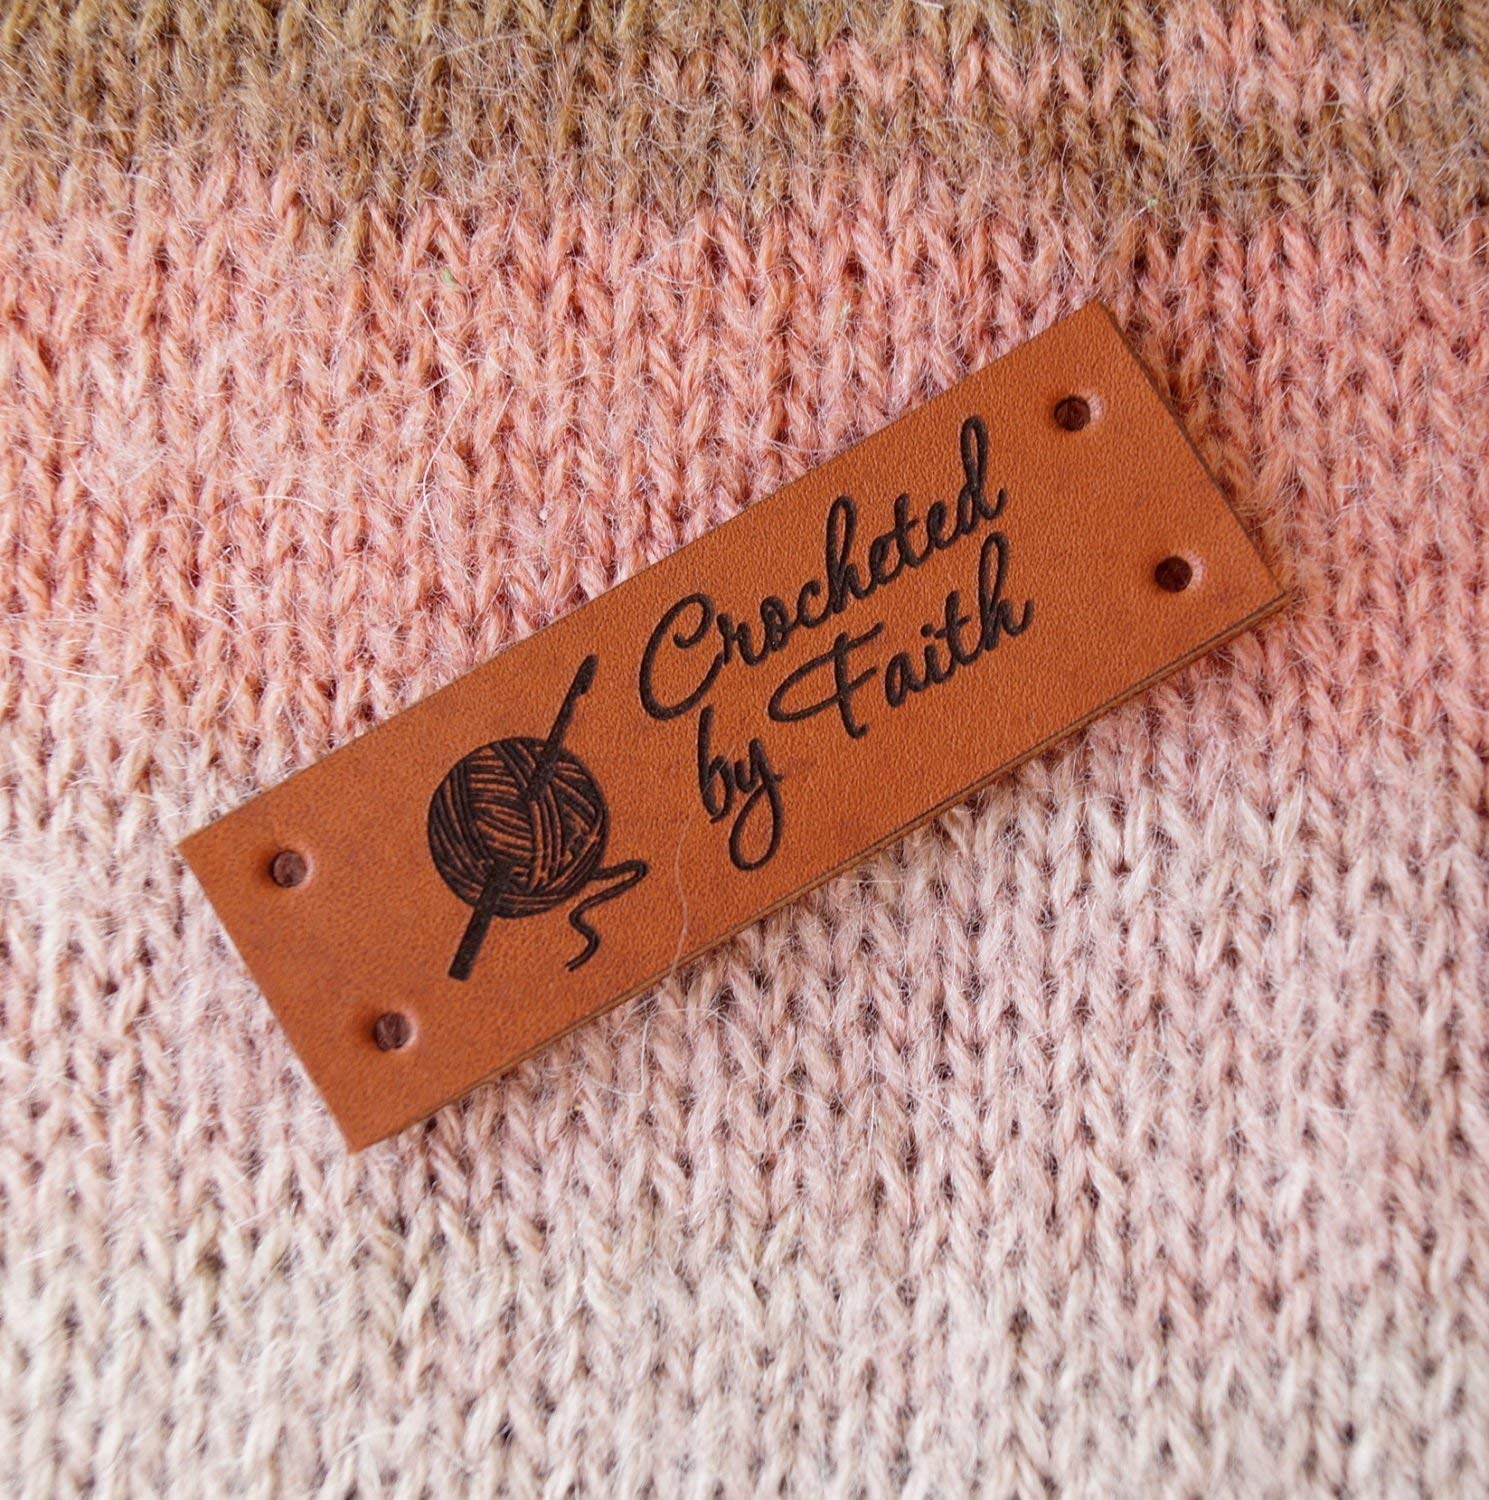 Custom garment labels, leather labels, personalized logo tags, clothing leather labels, knitting tags, labels for crochet products, 25 pc